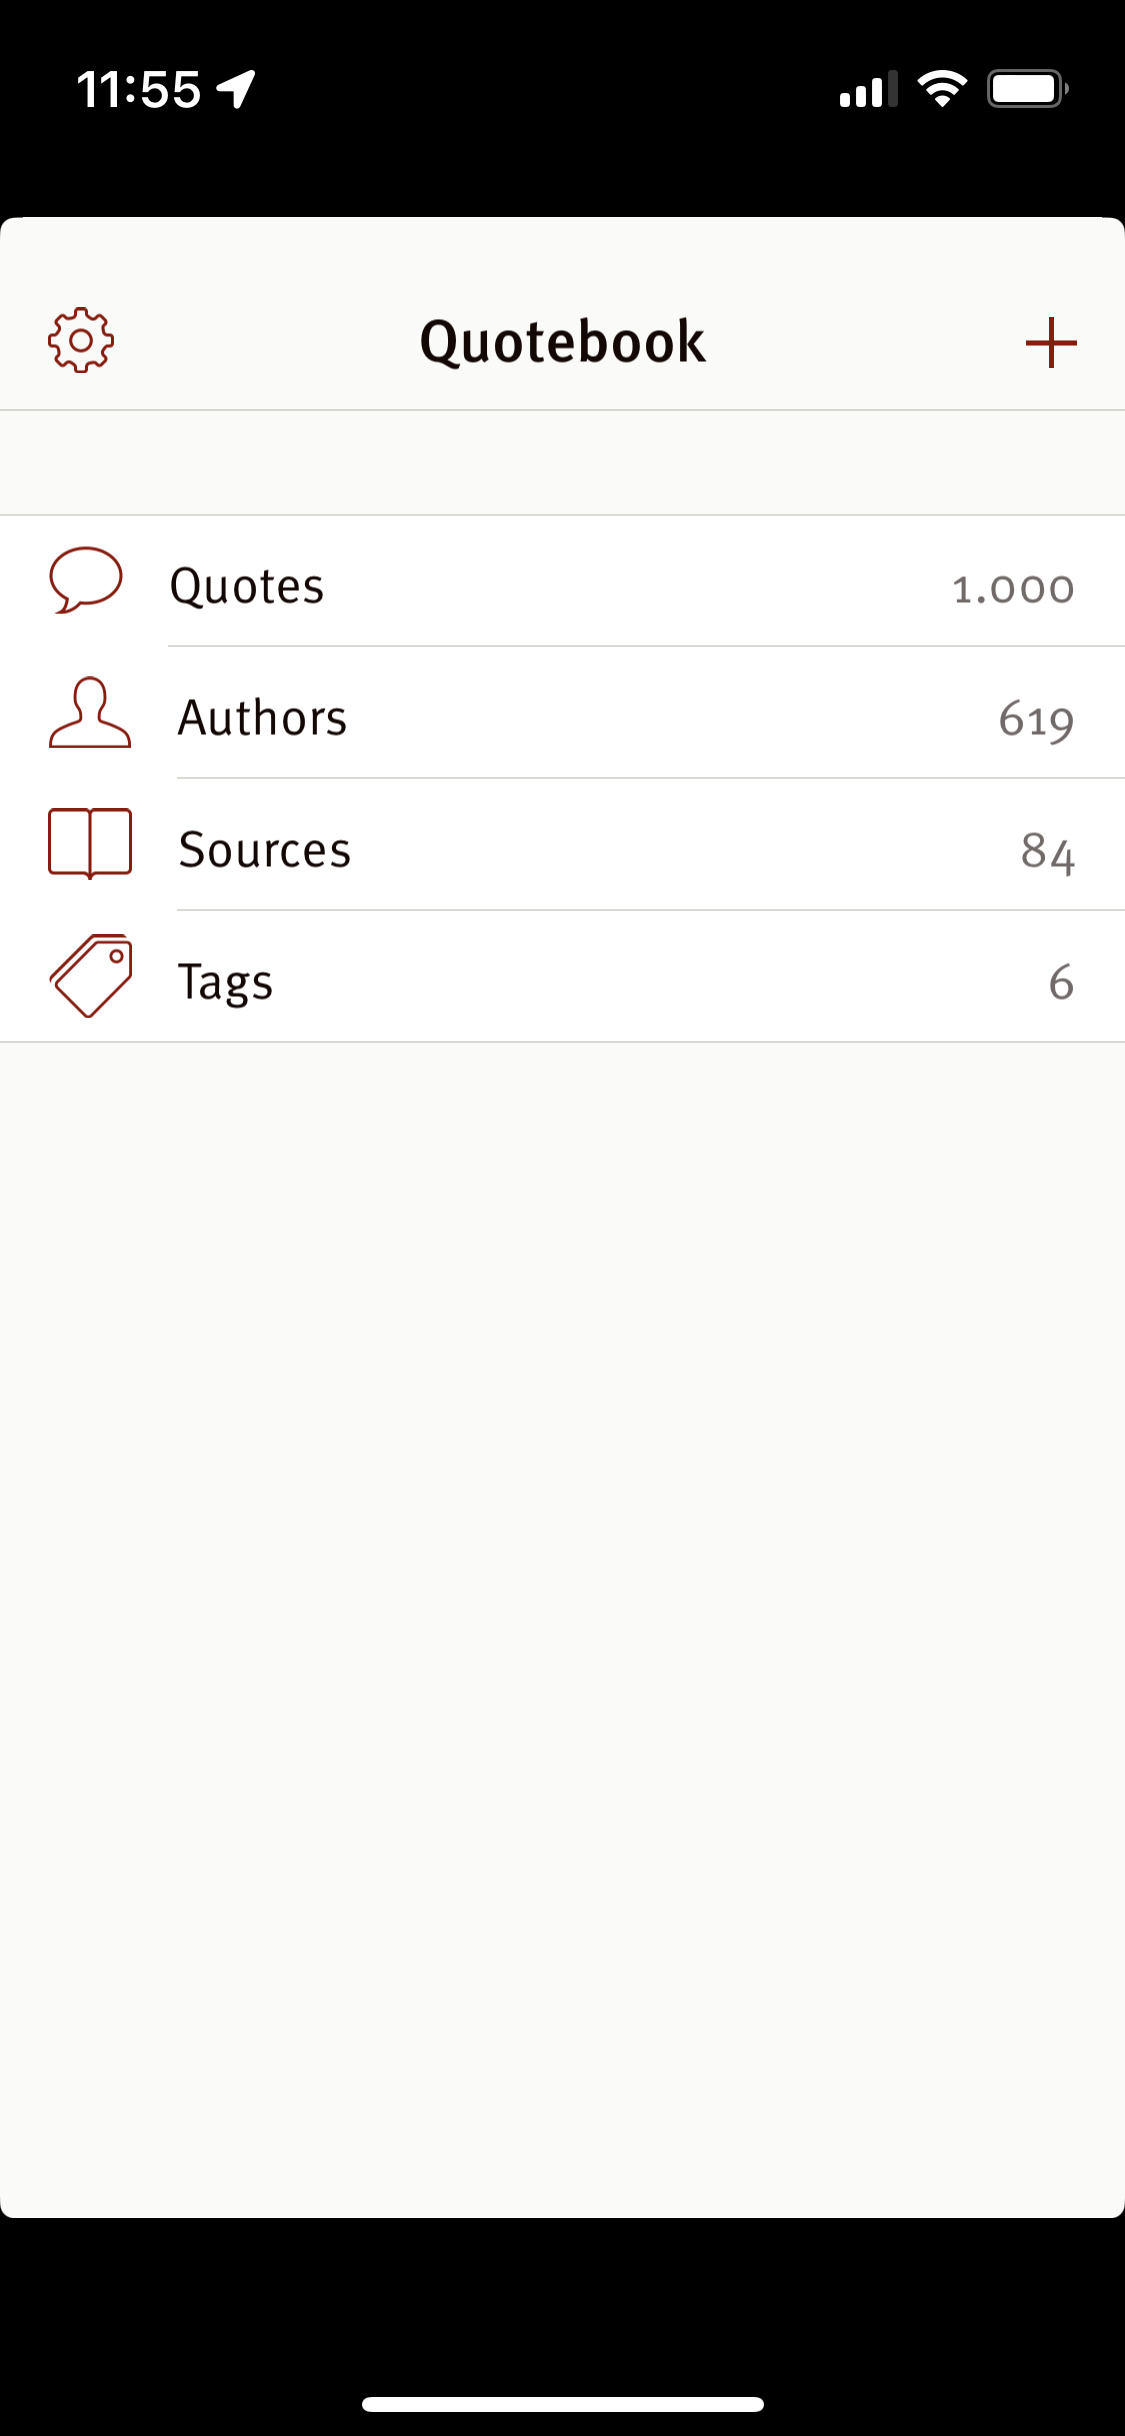 1000 quotes in the Quotebook app